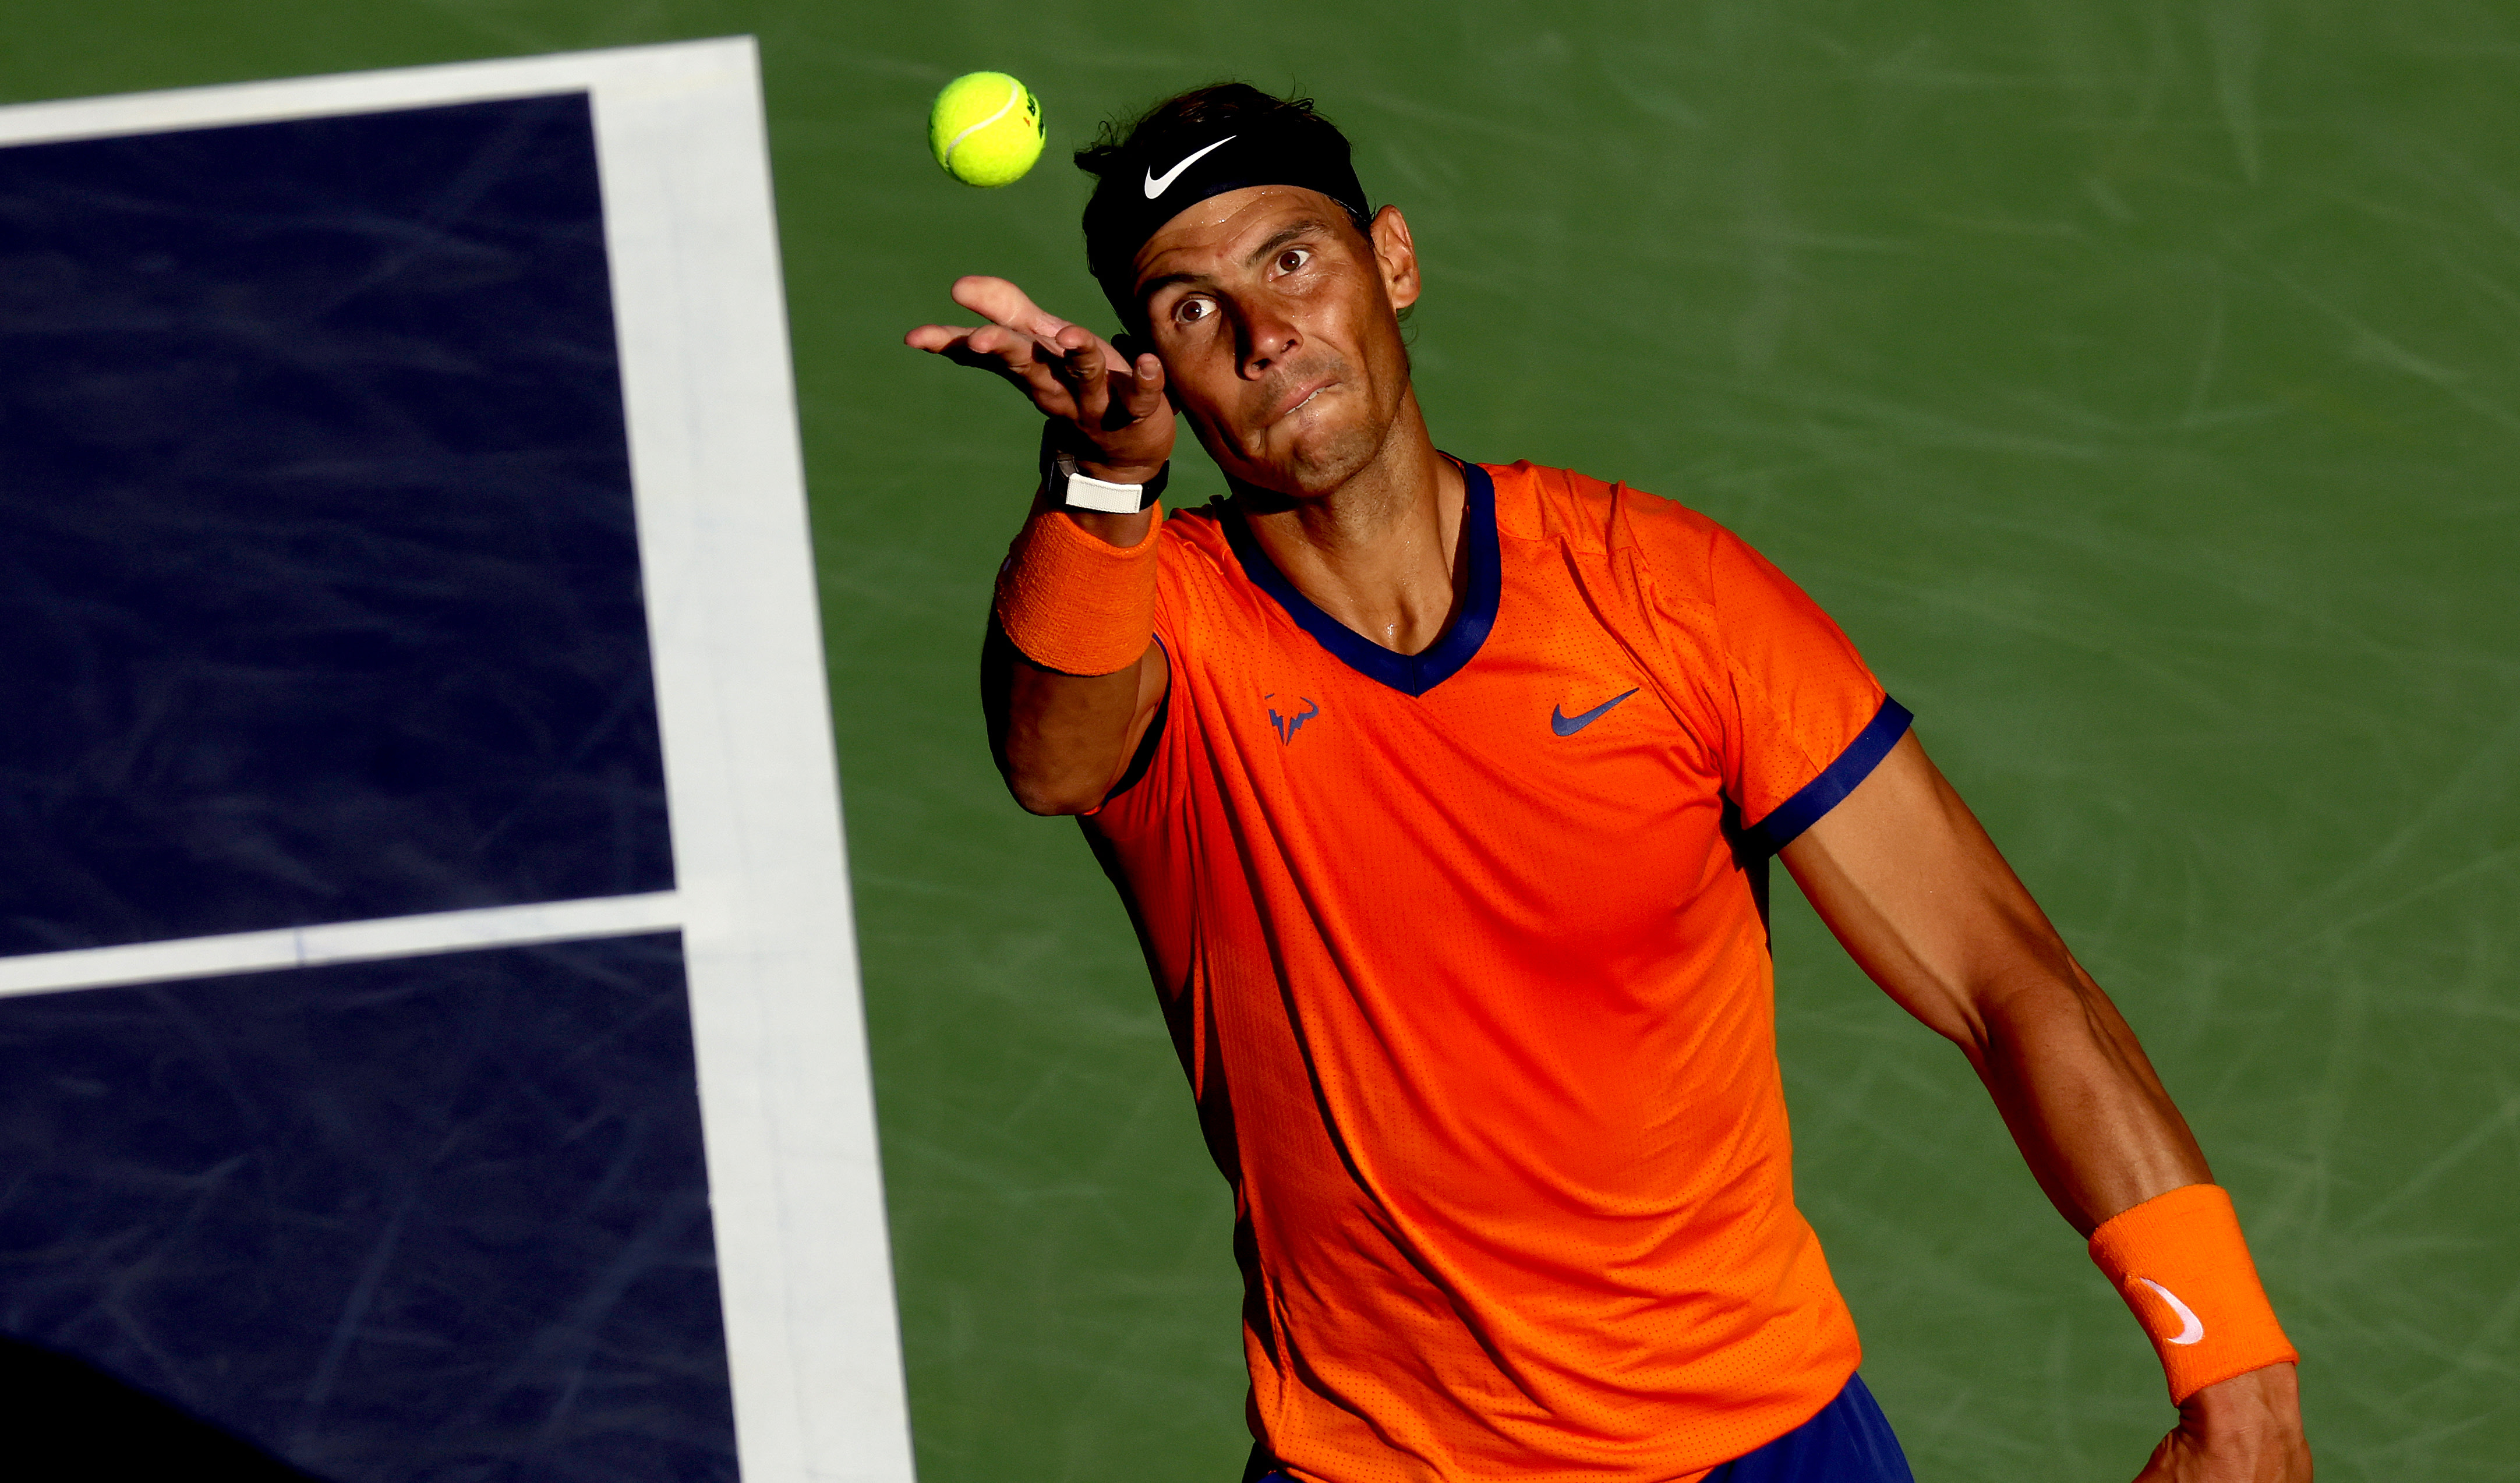 Week in Preview The stakes get a little higher in Cincinnati, as Rafael Nadal rejoins the tour for the final Masters 1000 before the years final major